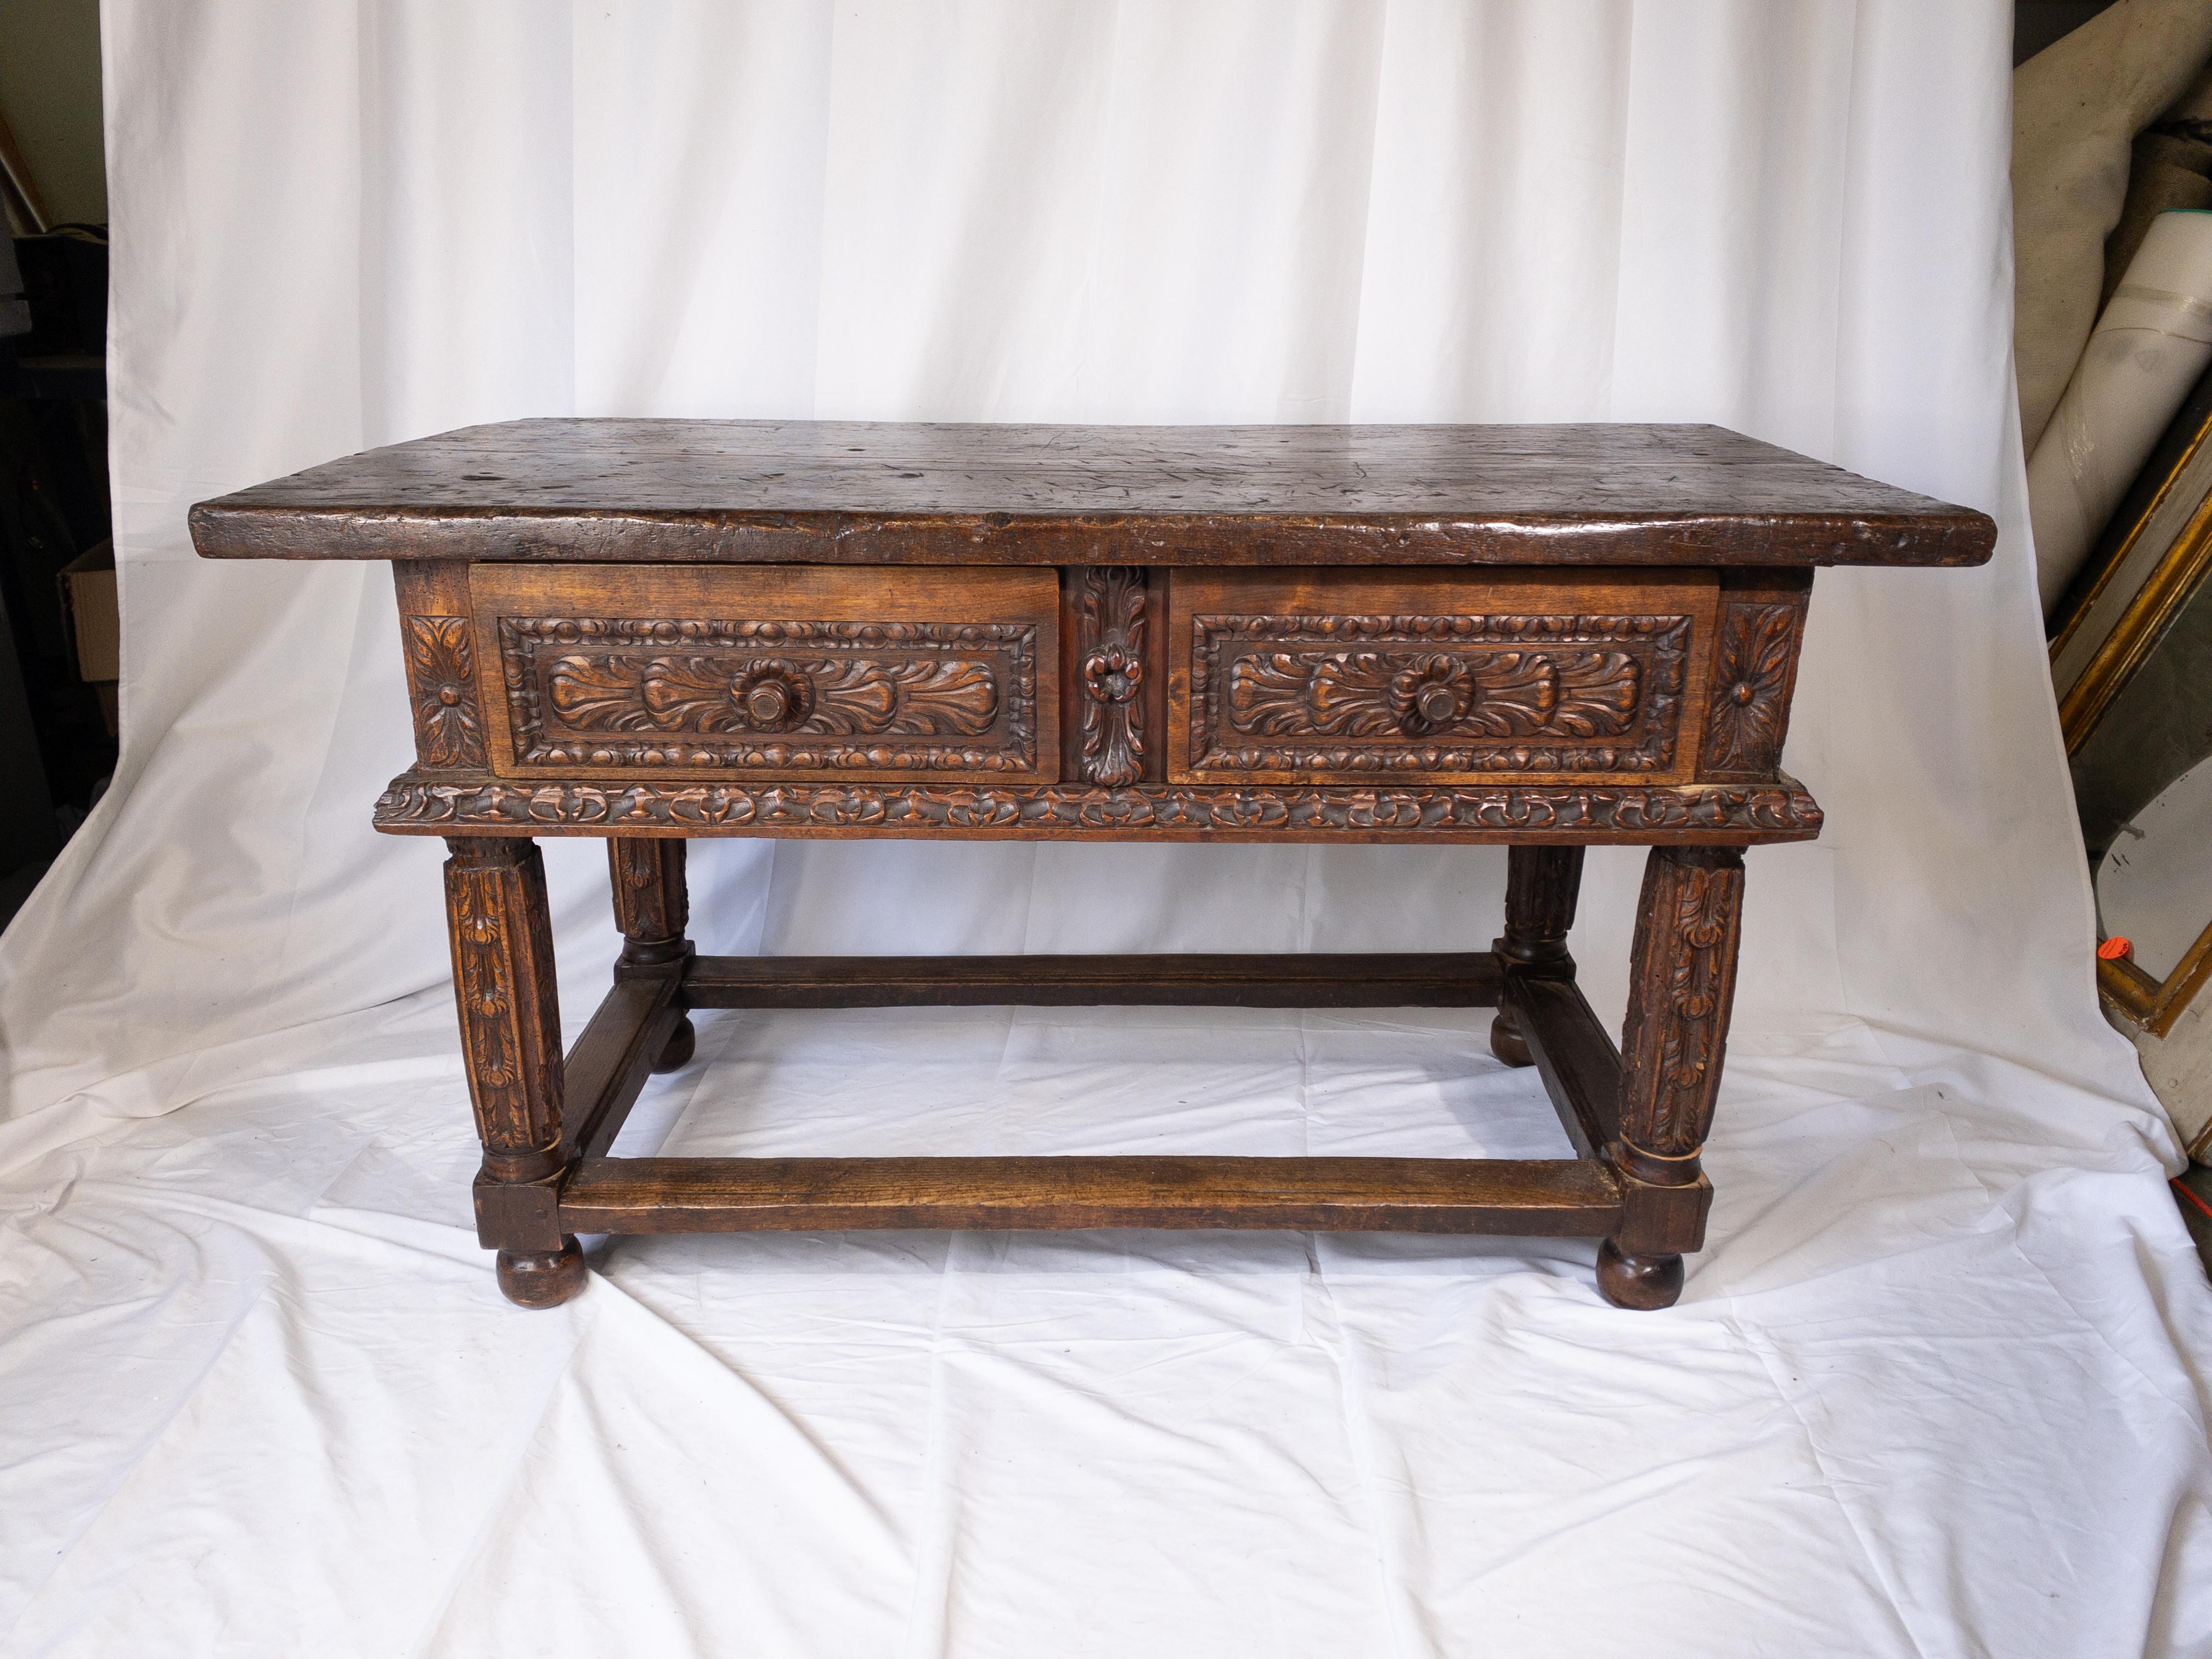 The 18th Century French Renaissance Console Table exudes elegance and opulence with its exquisite craftsmanship and lavish design. Crafted from rich, aged wood, its sturdy plank top provides a luxurious canvas for display or practical use. The